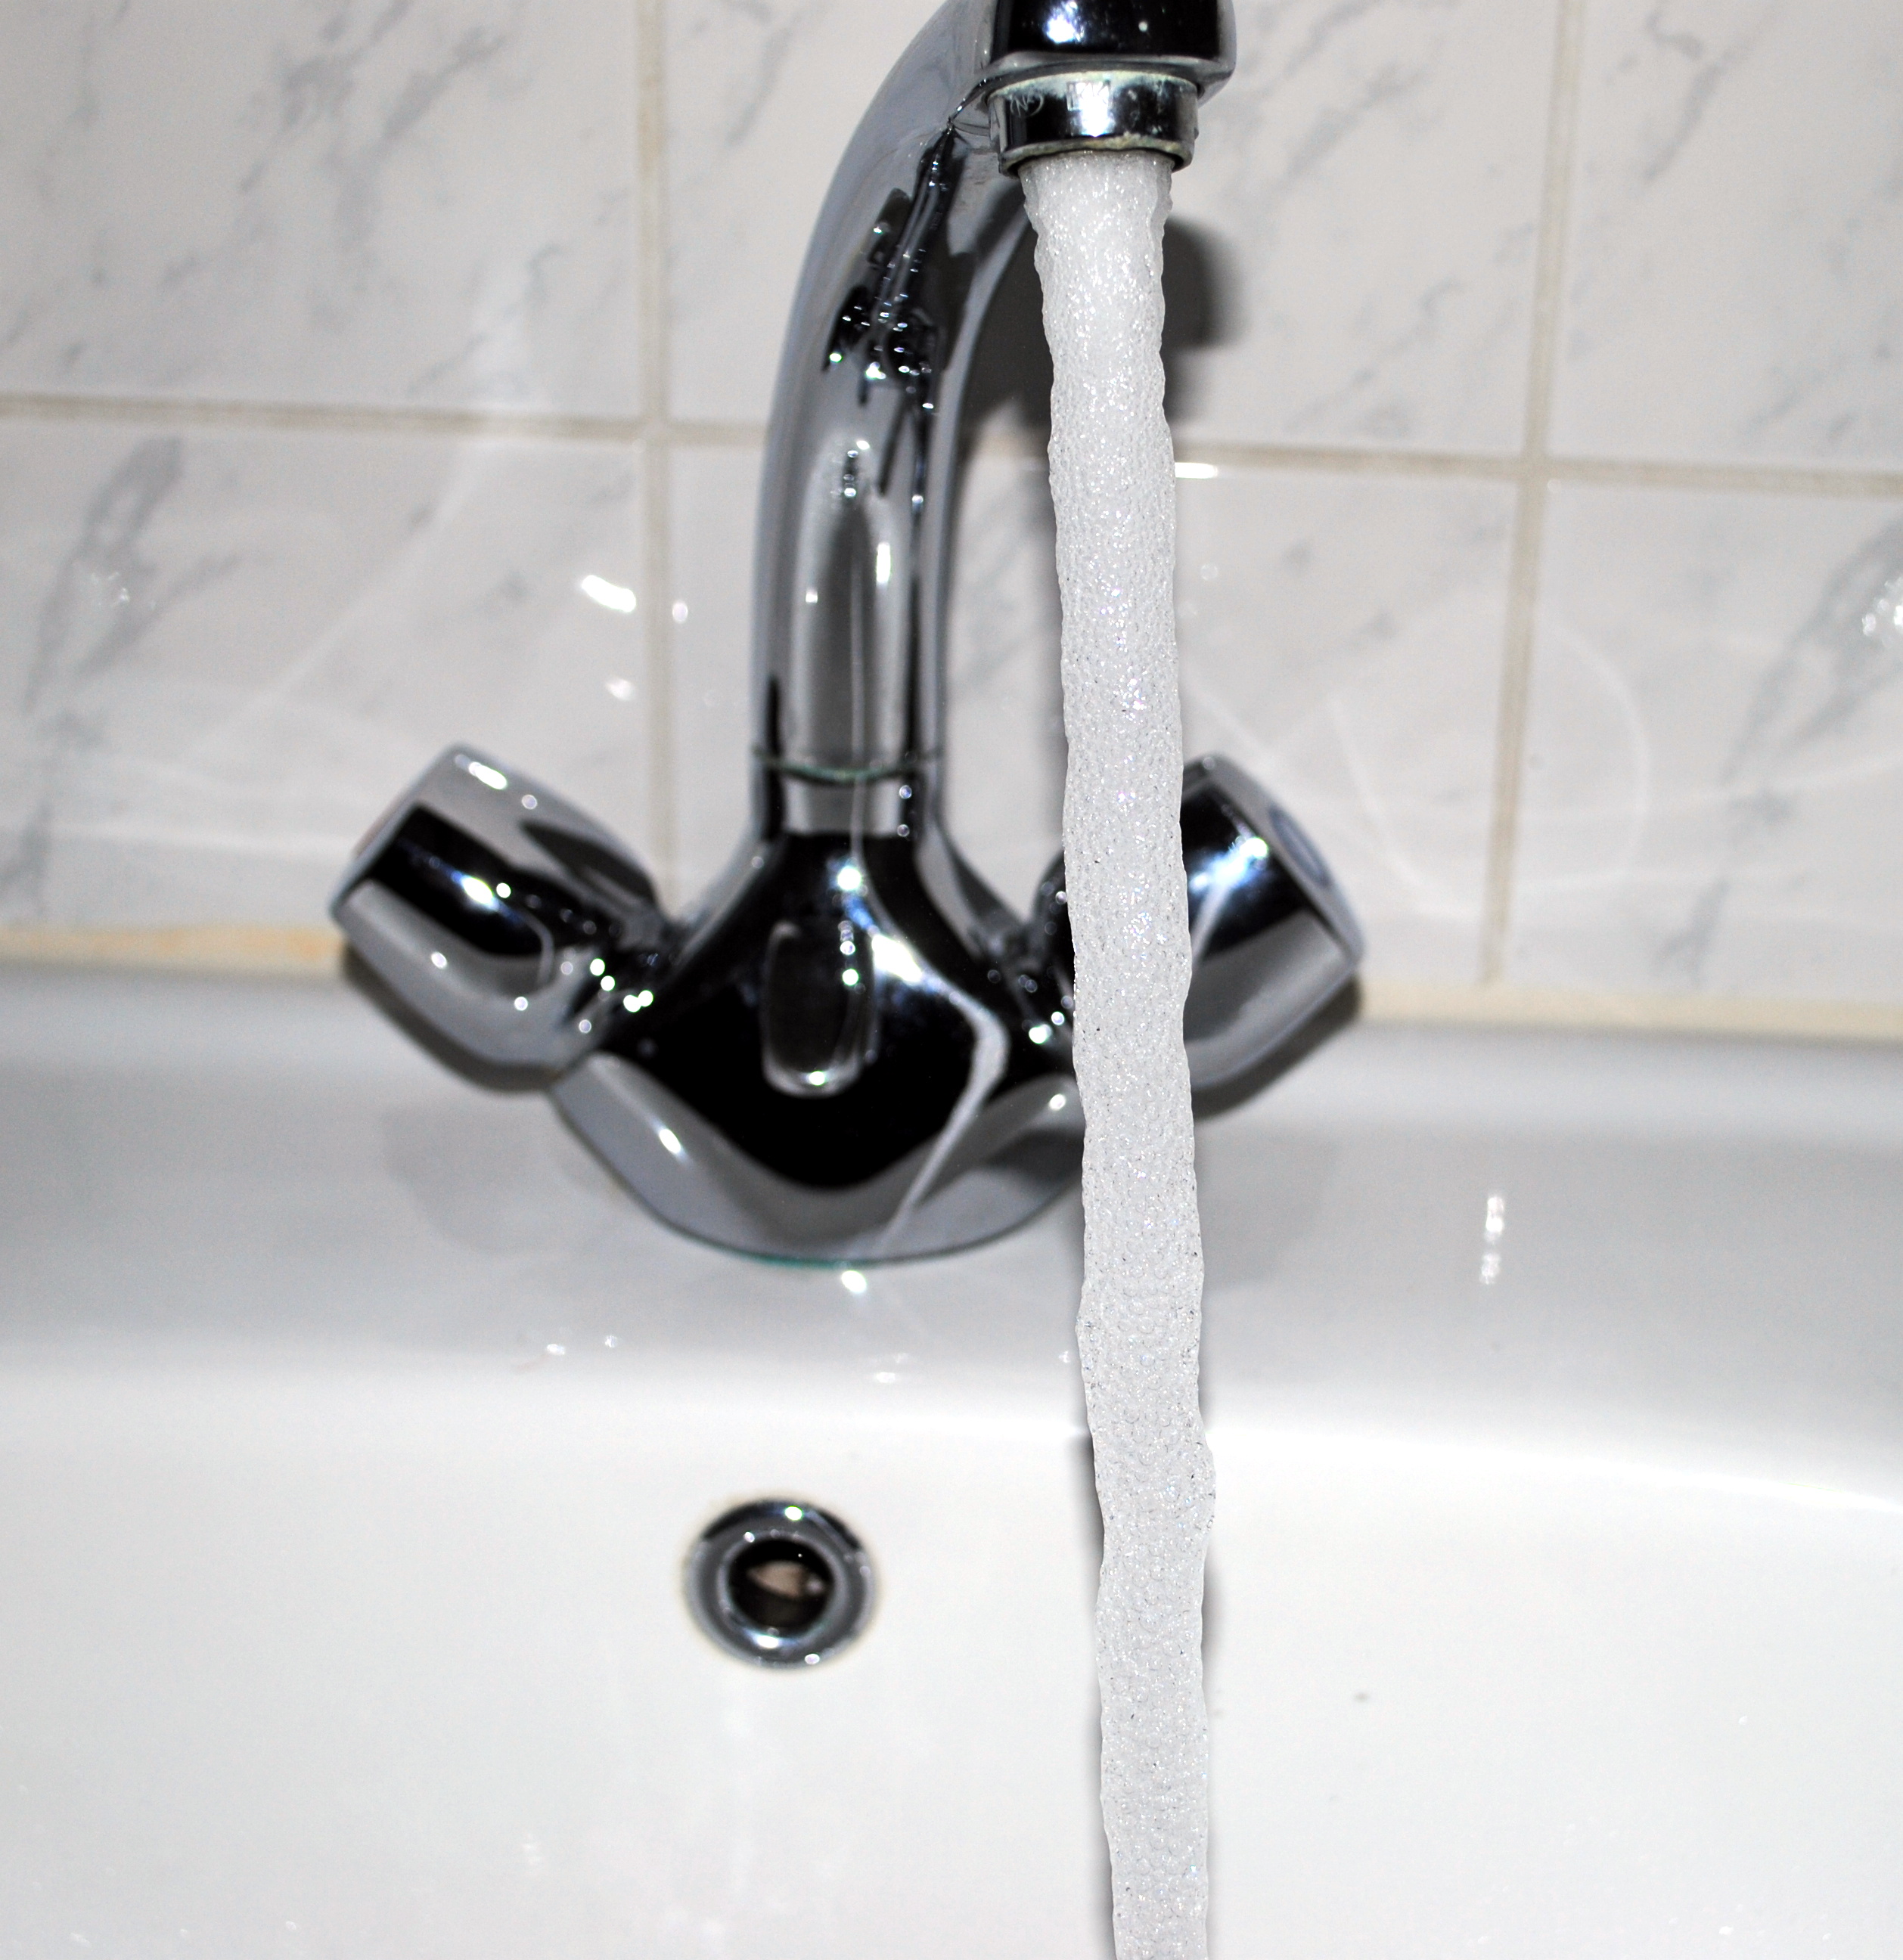 File:Aerated tap water.jpg - Wikimedia Commons